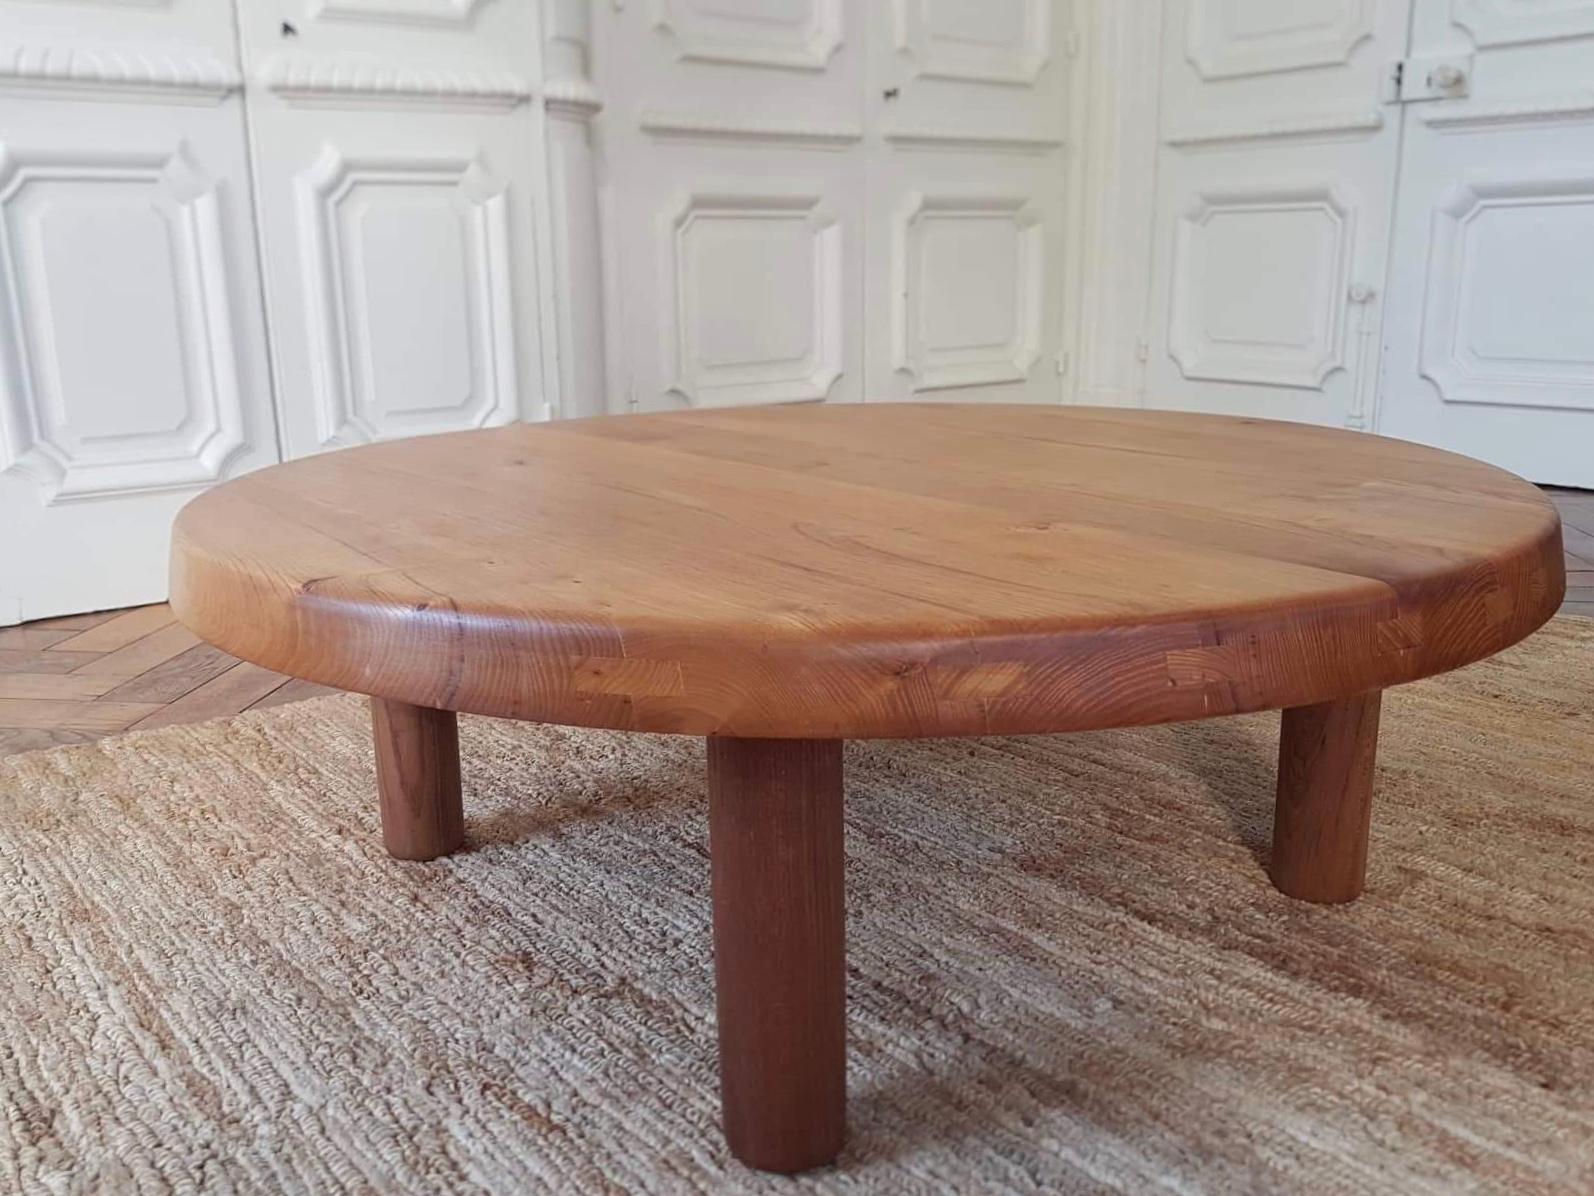 Round coffee table T 02M Pierre Chapo from 1970 in French Elm.
 Table with inclined edges with 4 removable cylindrical legs.
 Very beautiful patina of the wood, good used condition.

this Table goes perfectly with the furniture Jean prouvè,